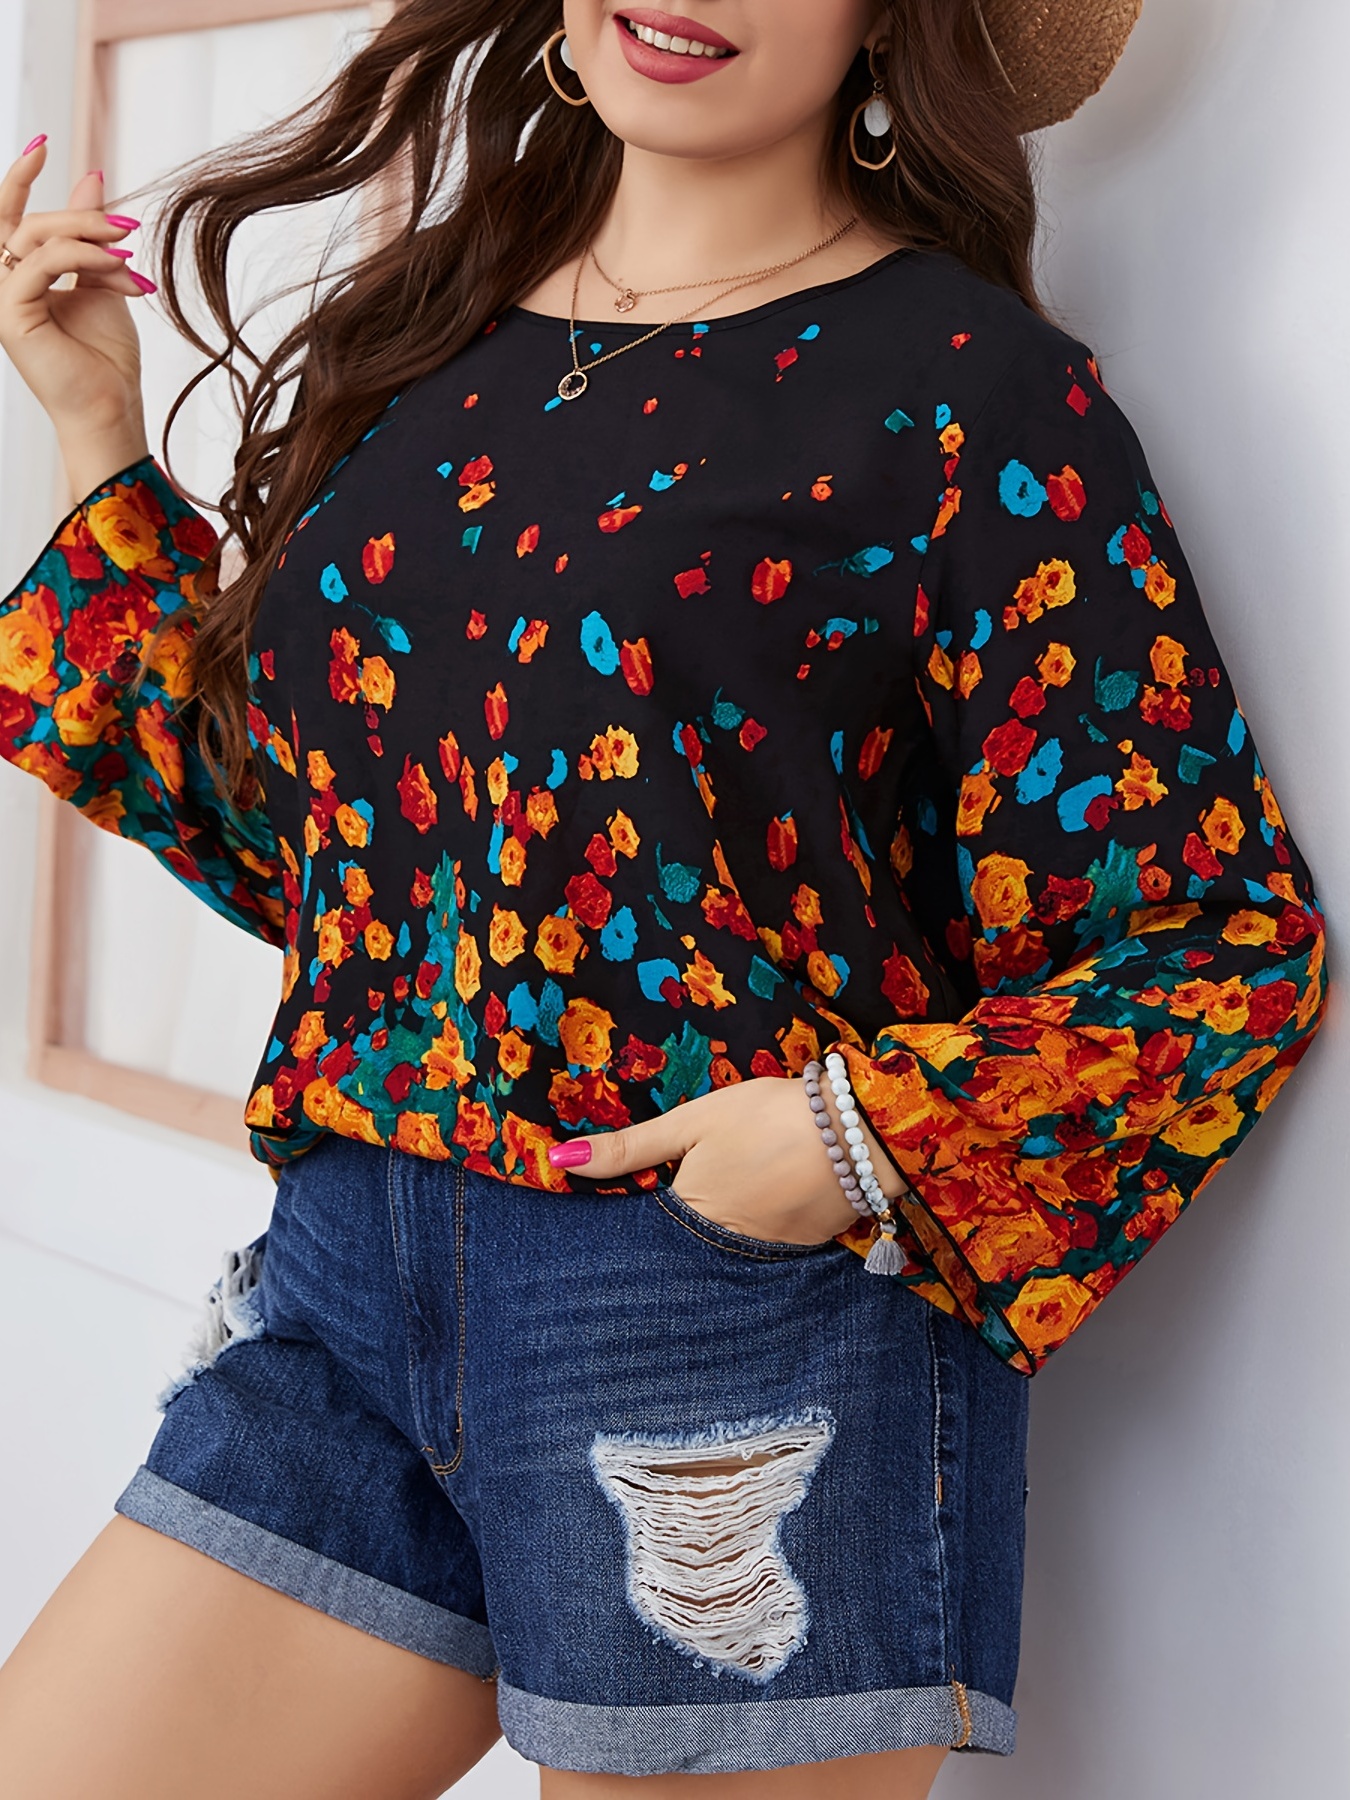 Lovely Wholesale plus size blouse design for women At An Amazing